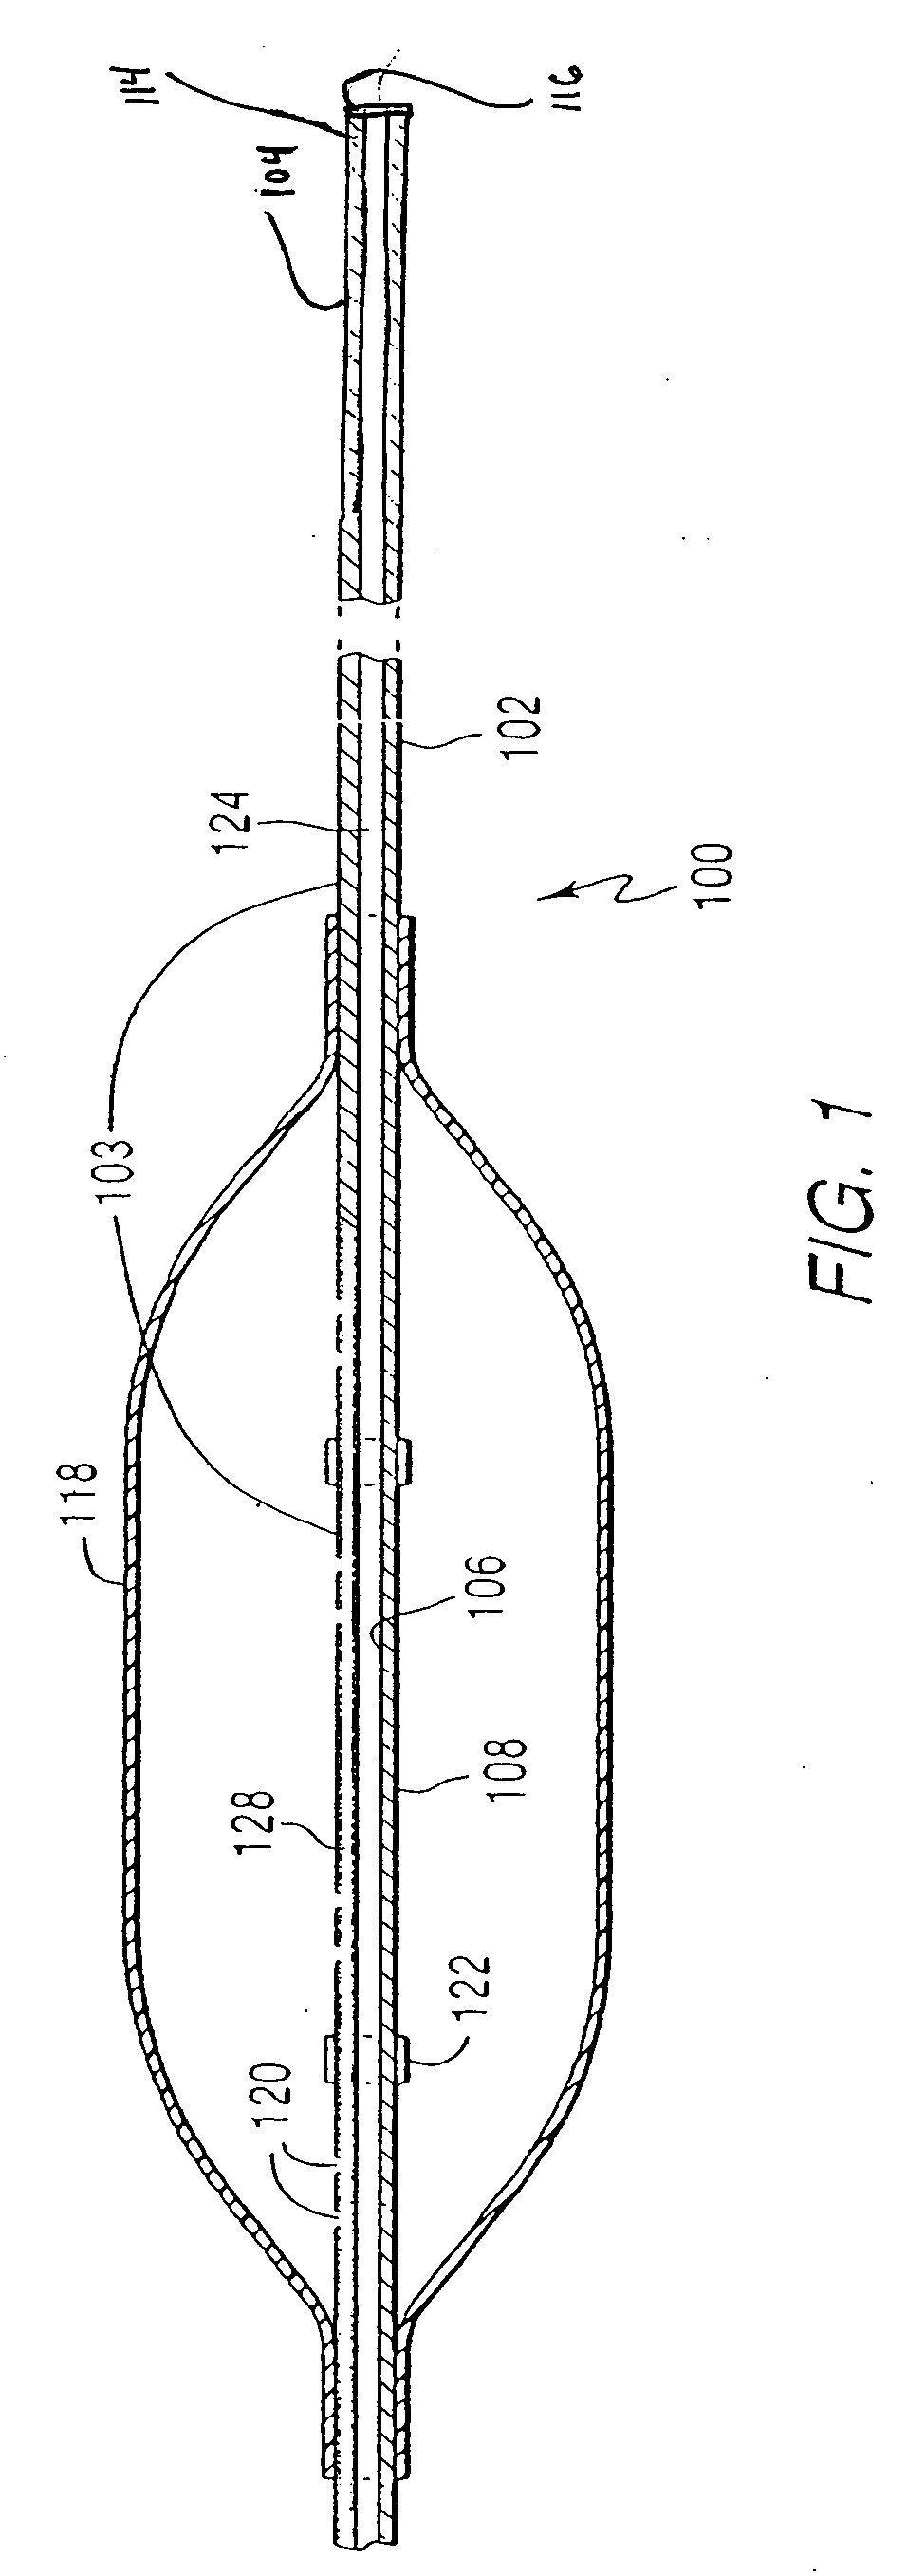 Vascular catheter with an expandable section and a distal tip for delivering a thromboembolic protection device and method of use